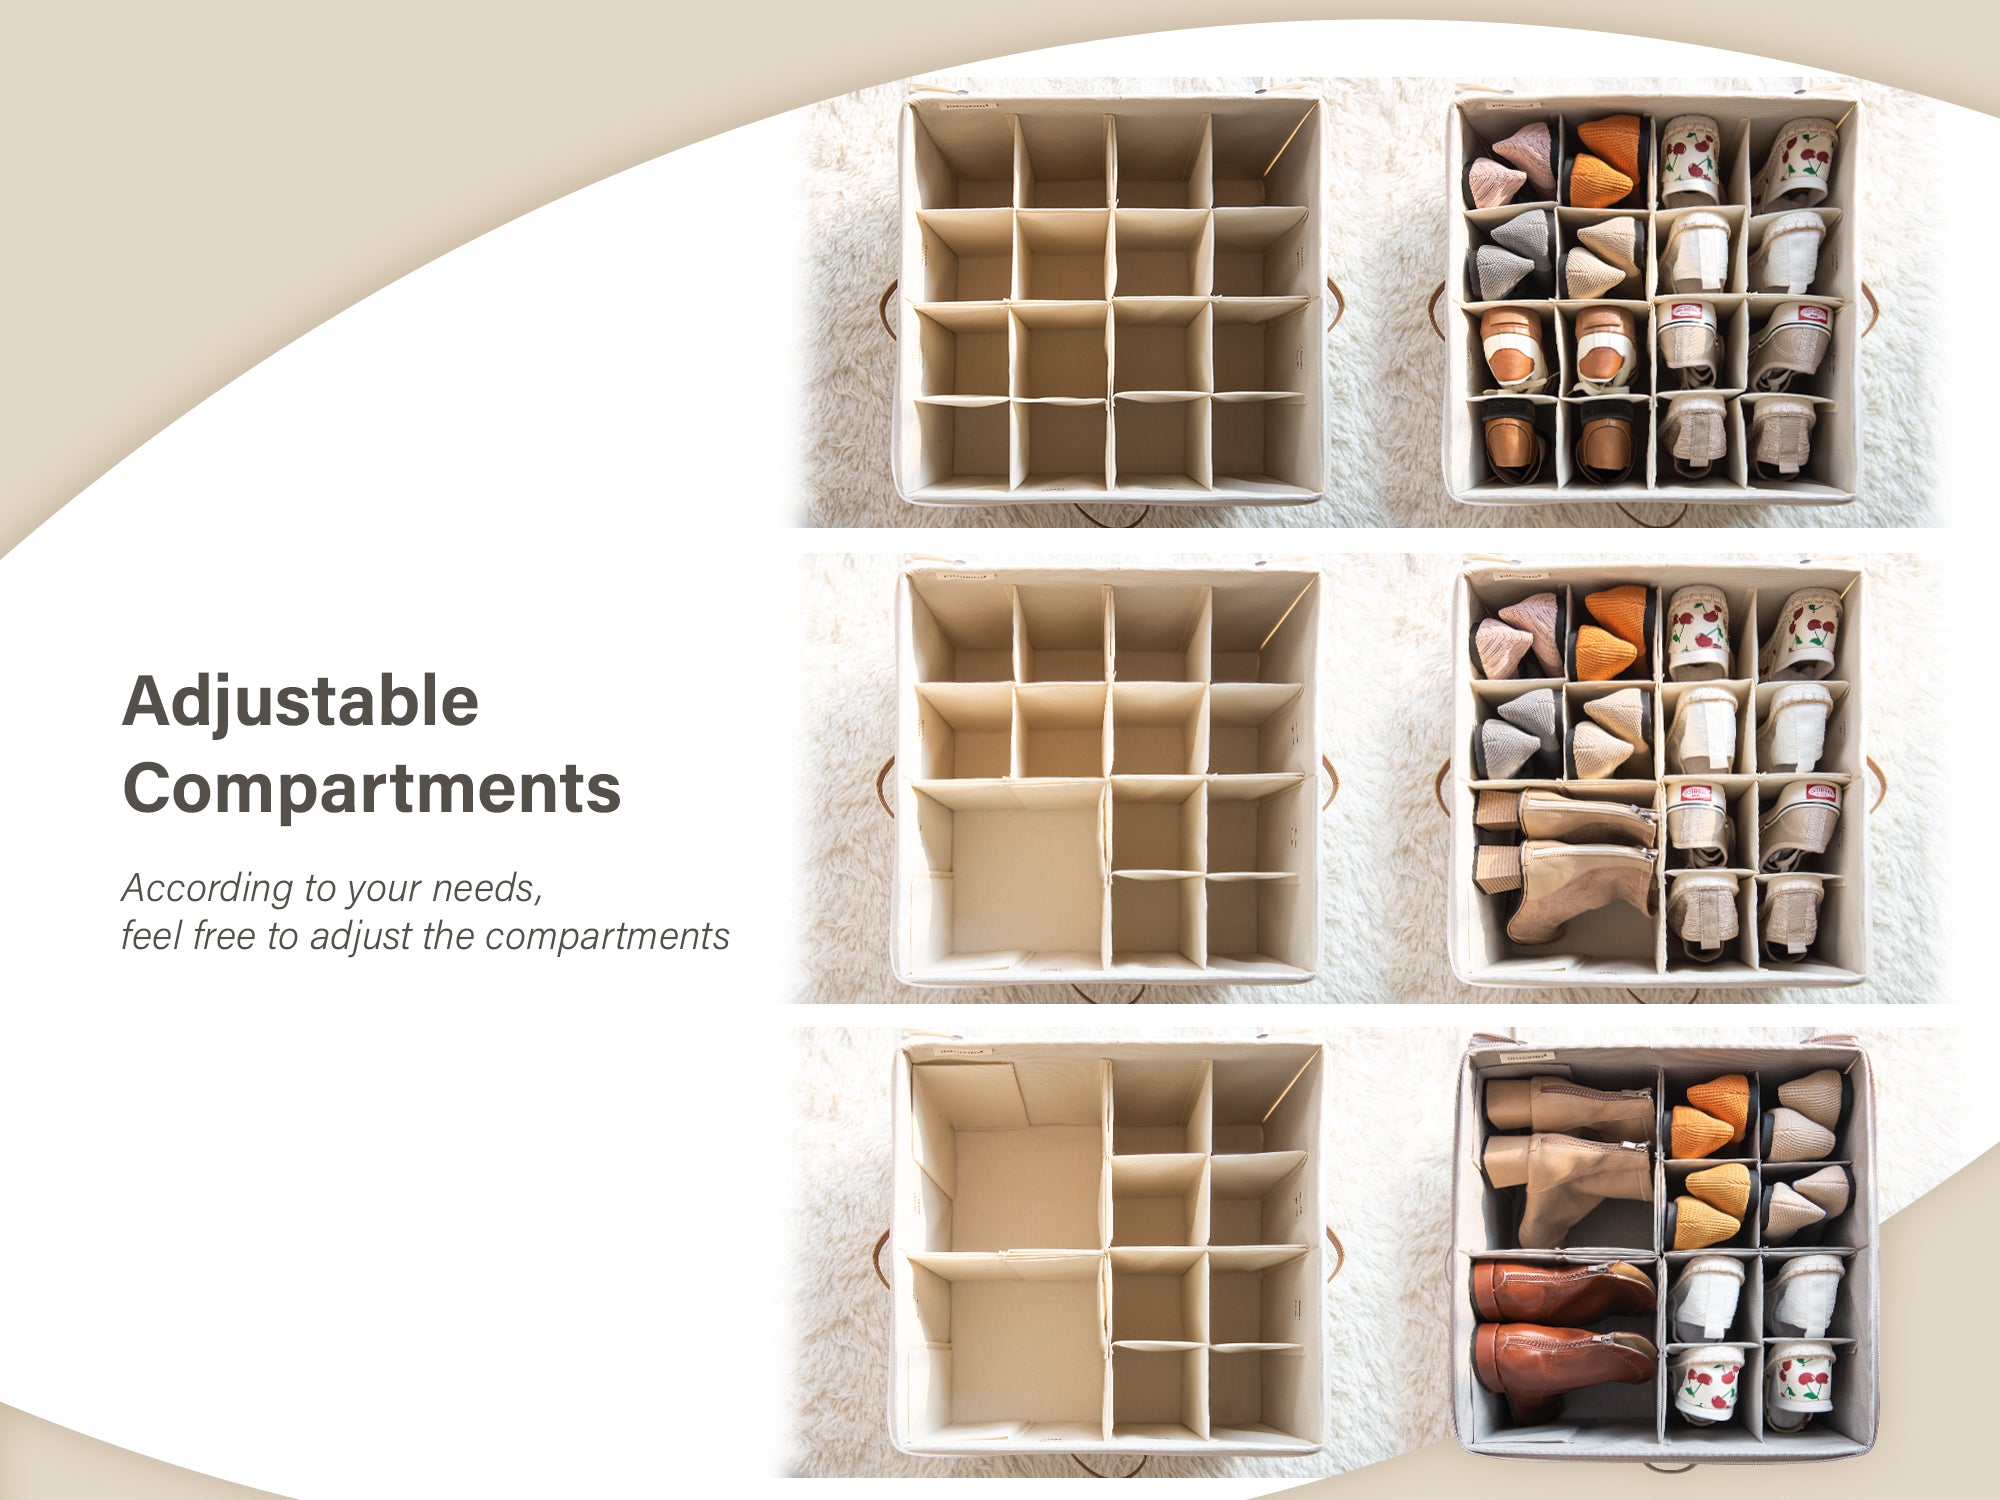 Showing the adjustable compartments of the shoe storage organizer